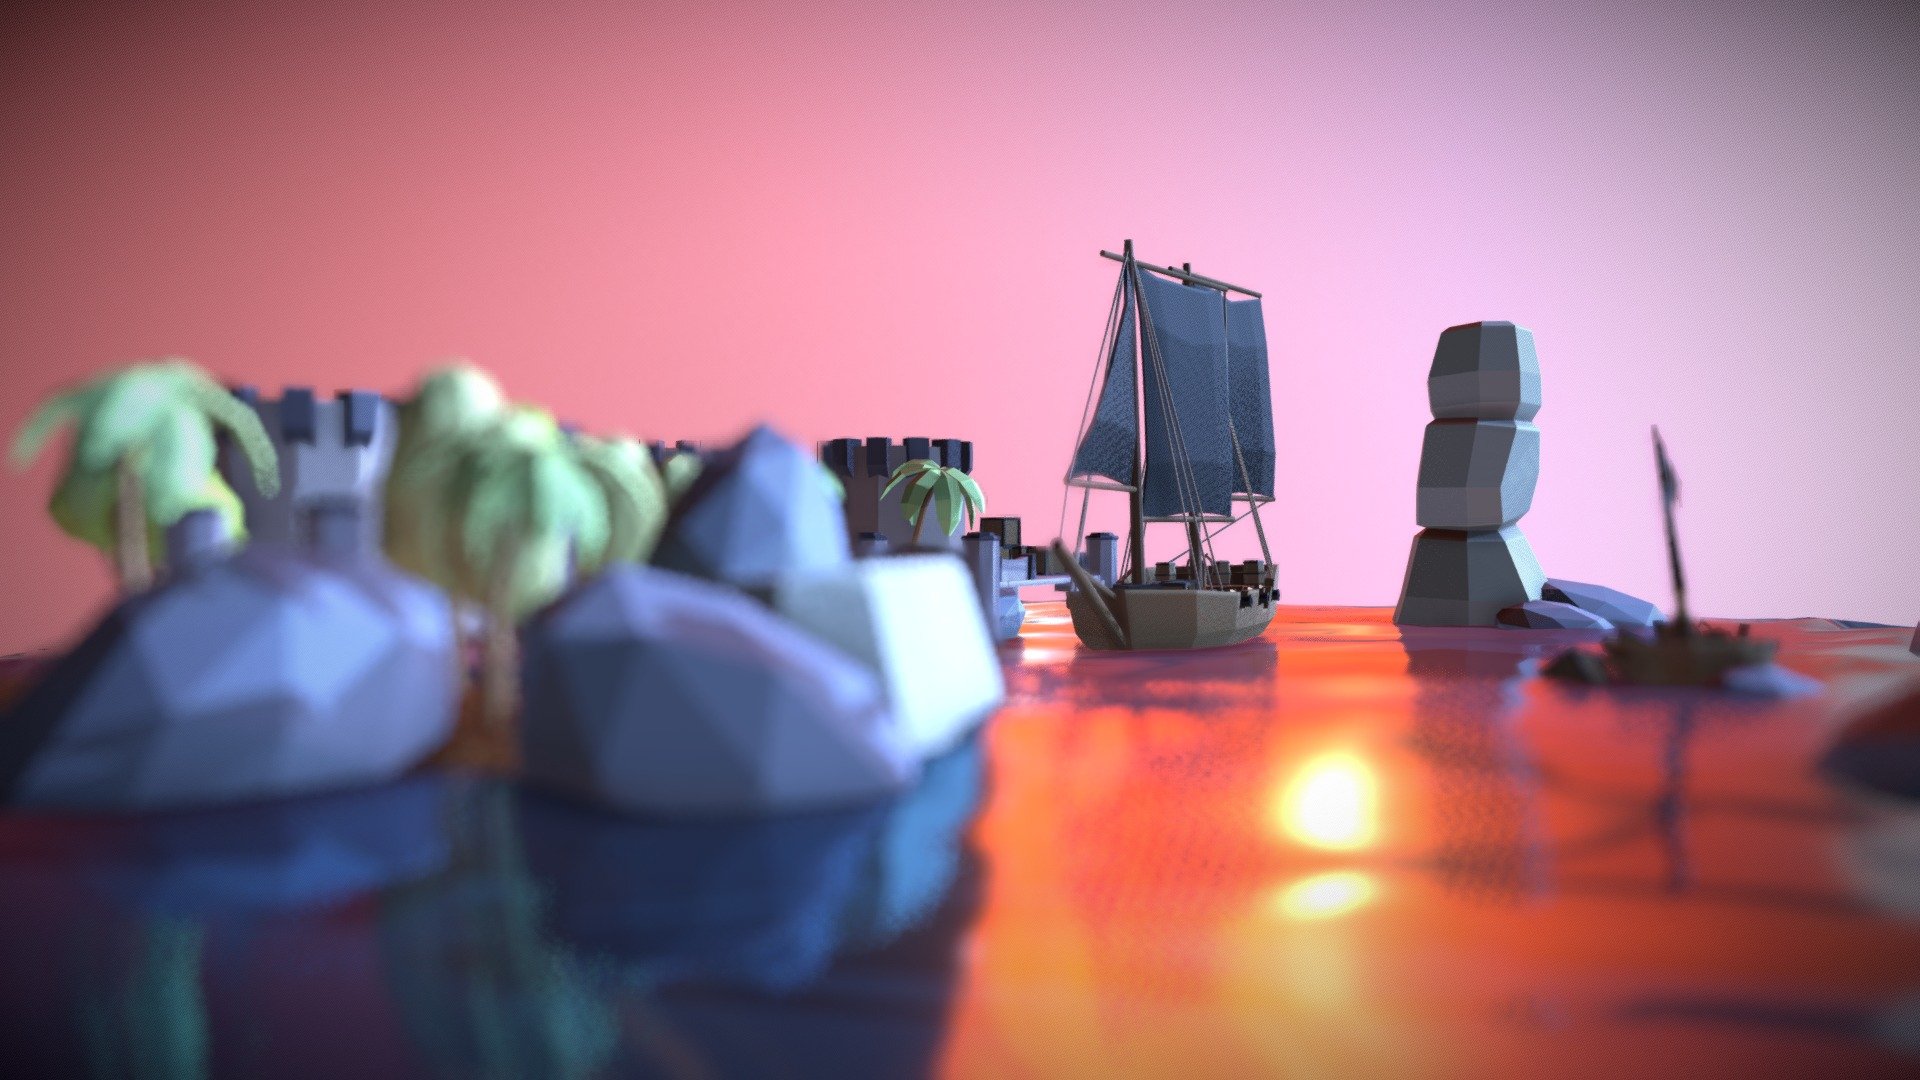 Even a small island on the middle of the ocean can store big secrets. So a small castle borns from nothing. Brave soldiers that tries to keep the pirates away. Thousands of low poly treasures hidden here. :)

These models where taken from my personal game development library (all created by me). They where created for a Pirate game with some RPG elements.

By Guilherme Teres Nunes (Uniday Studio) - Pirate Island (Low Poly) - 3D model by Uniday Studio (@unidaystudio) 3d model